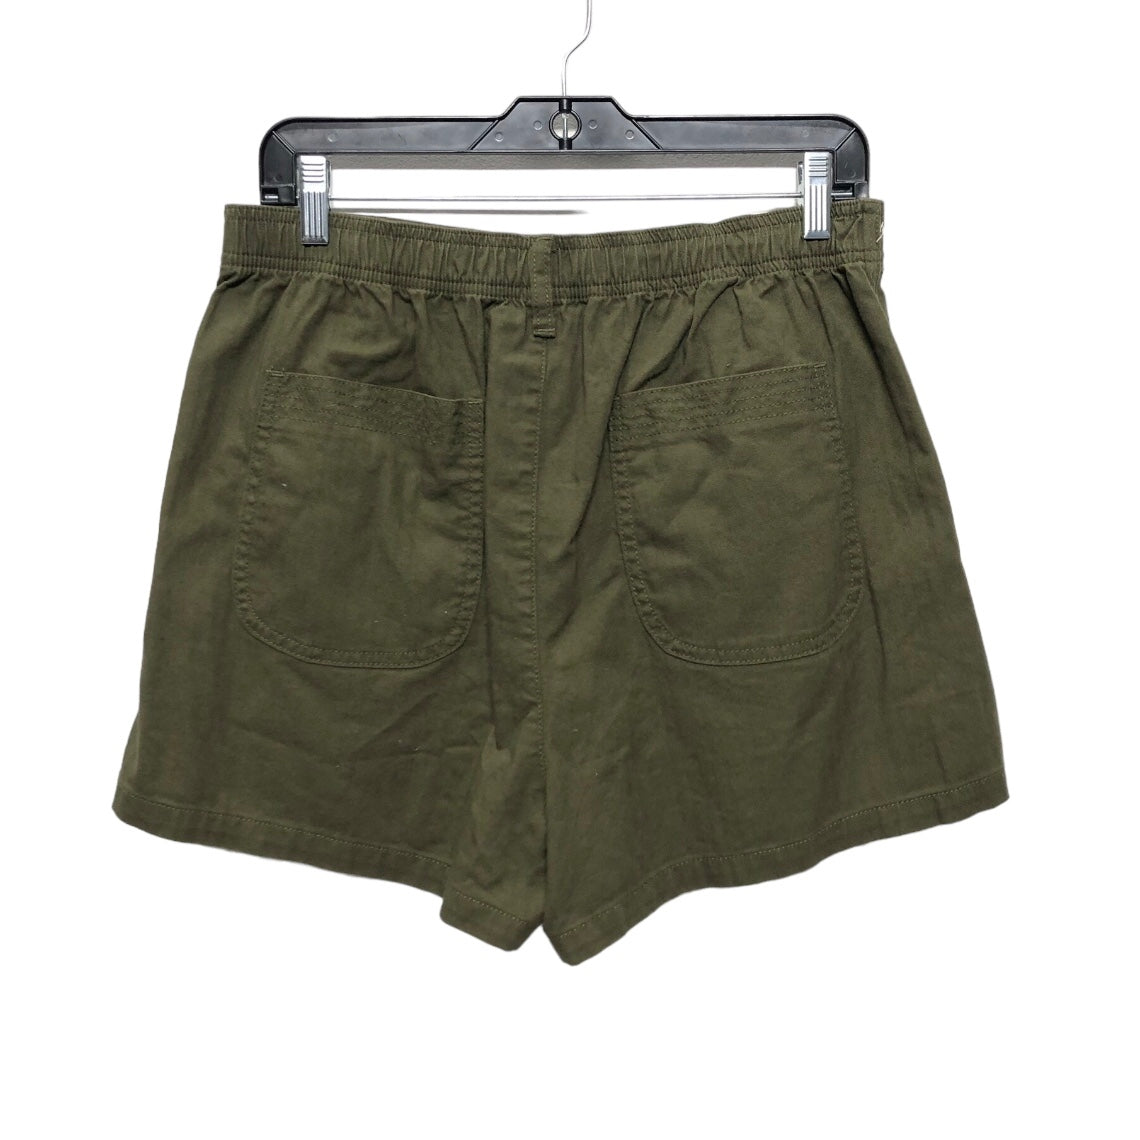 Green Shorts Madewell, Size M